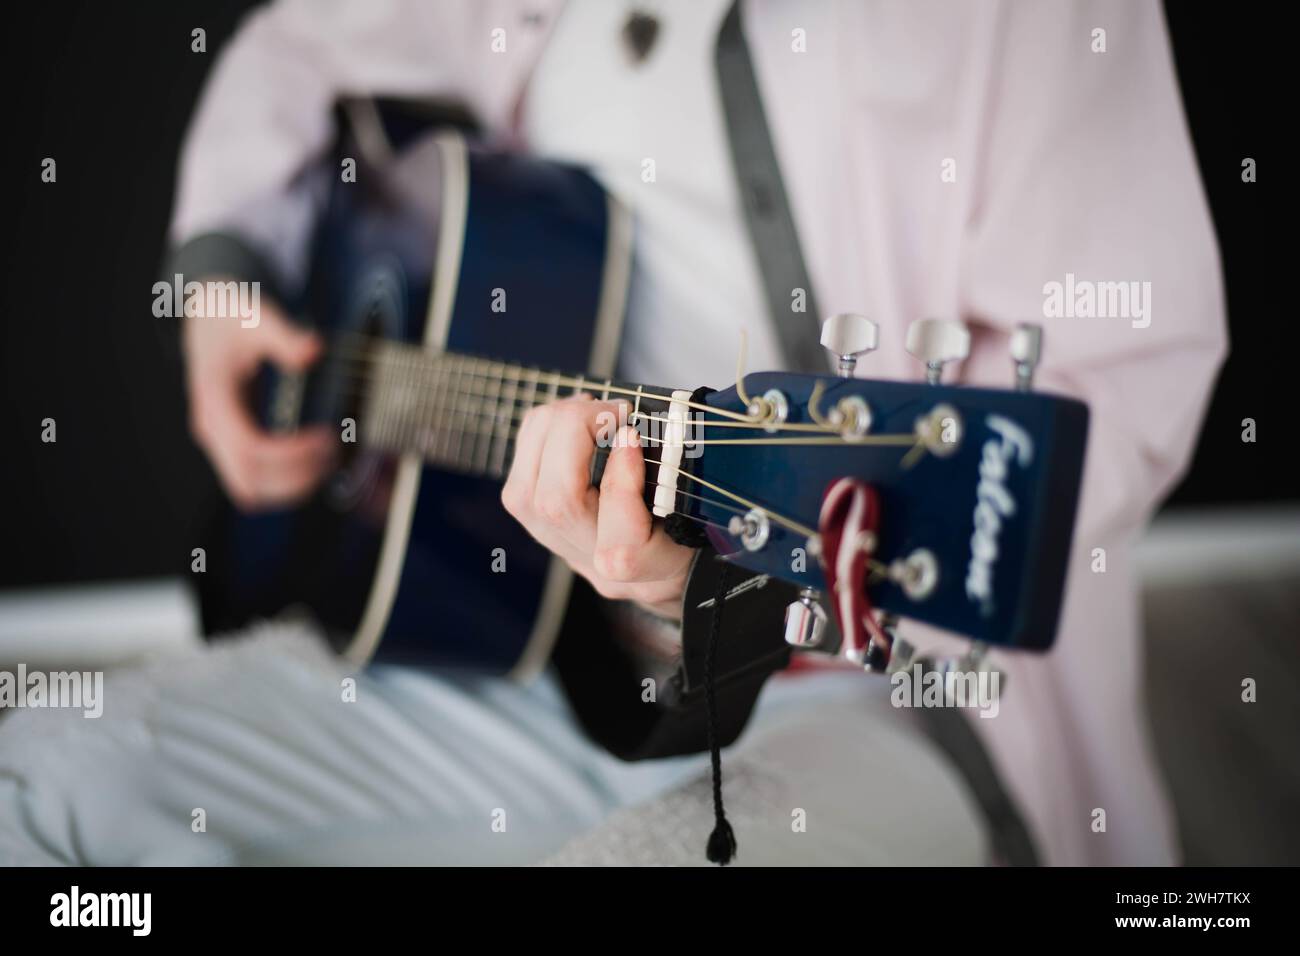 A young slim attractive man in white shirt playing  blue guitar on black  background, close up Stock Photo